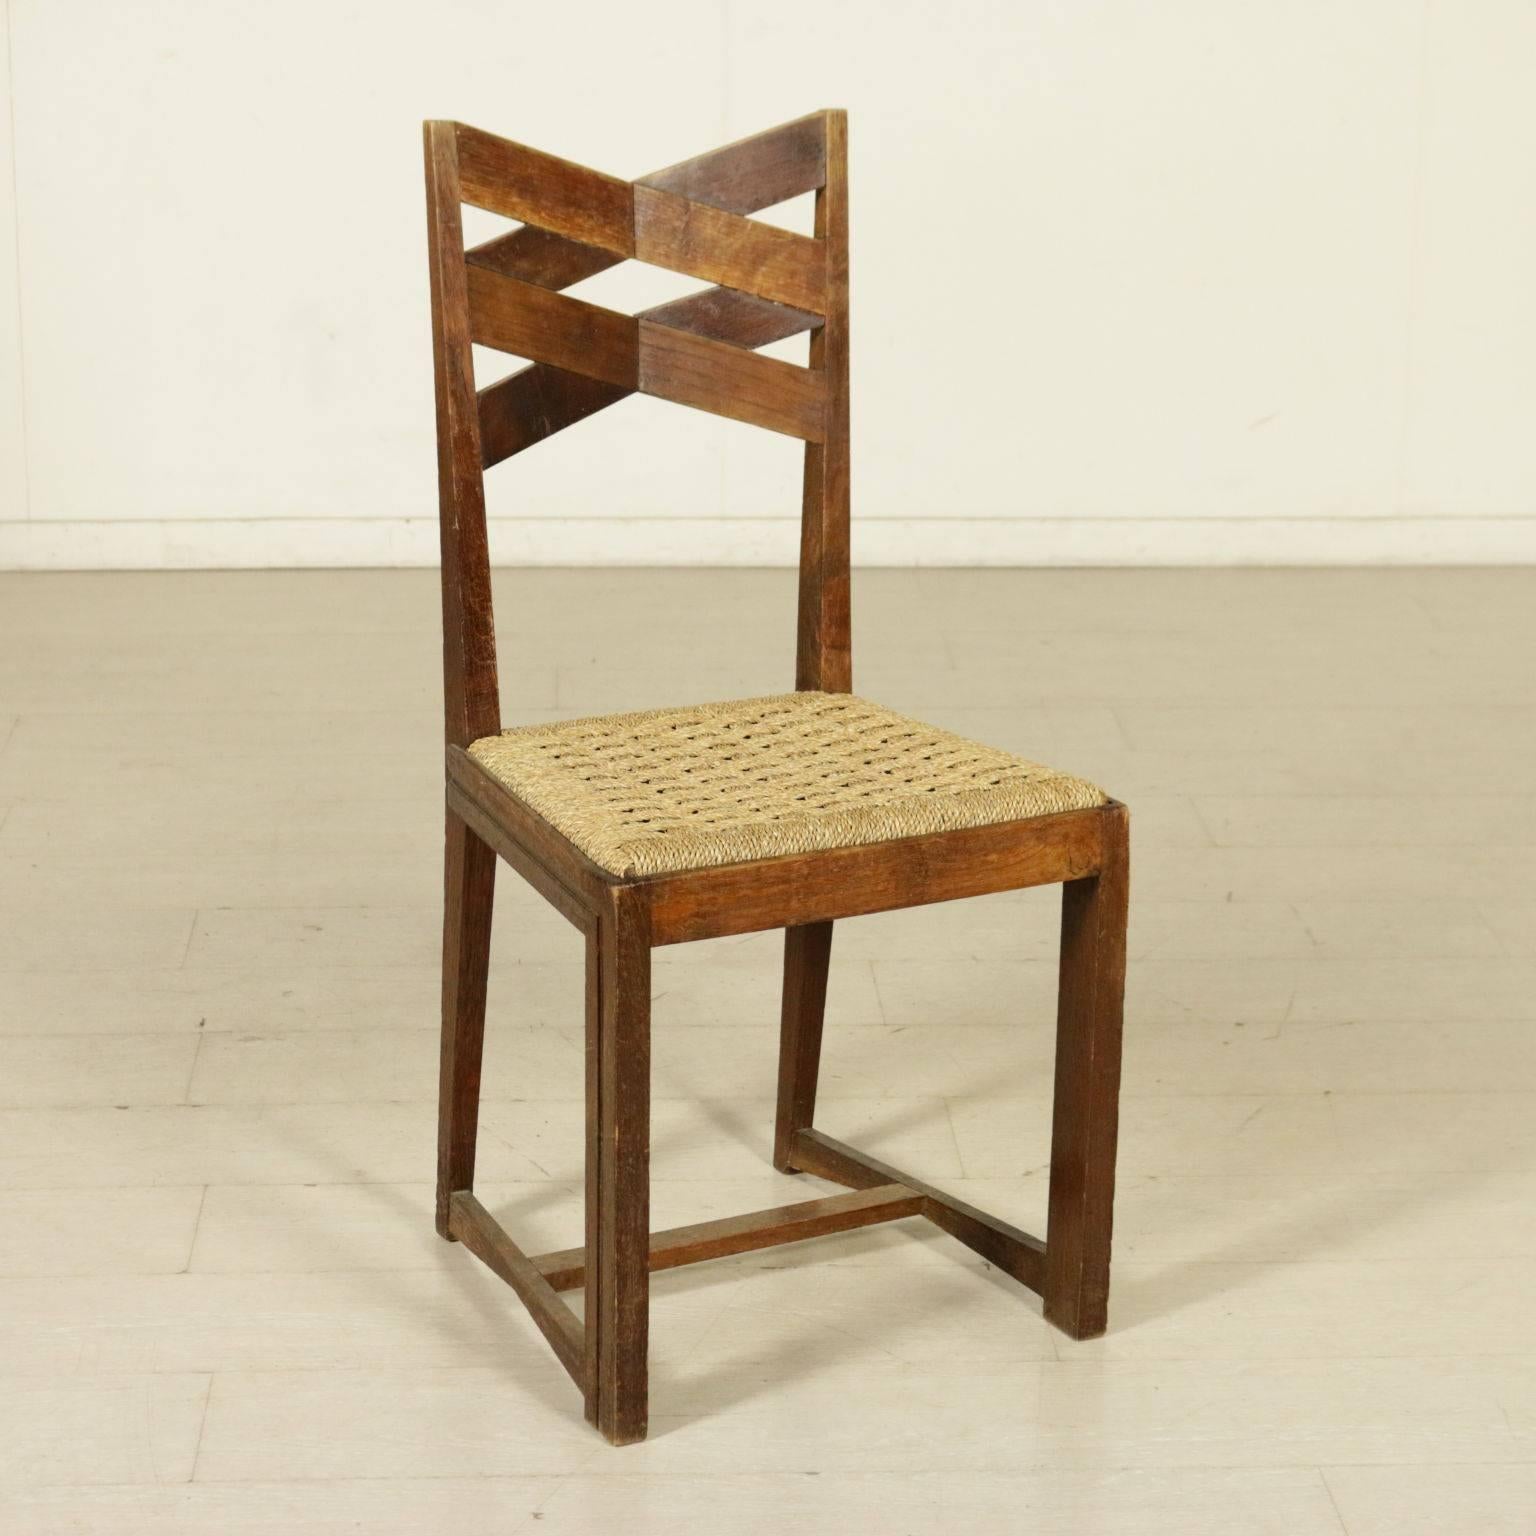 A group of four chairs, oak wood, seat made of intertwined rope. Manufactured in Italy, 1940s.